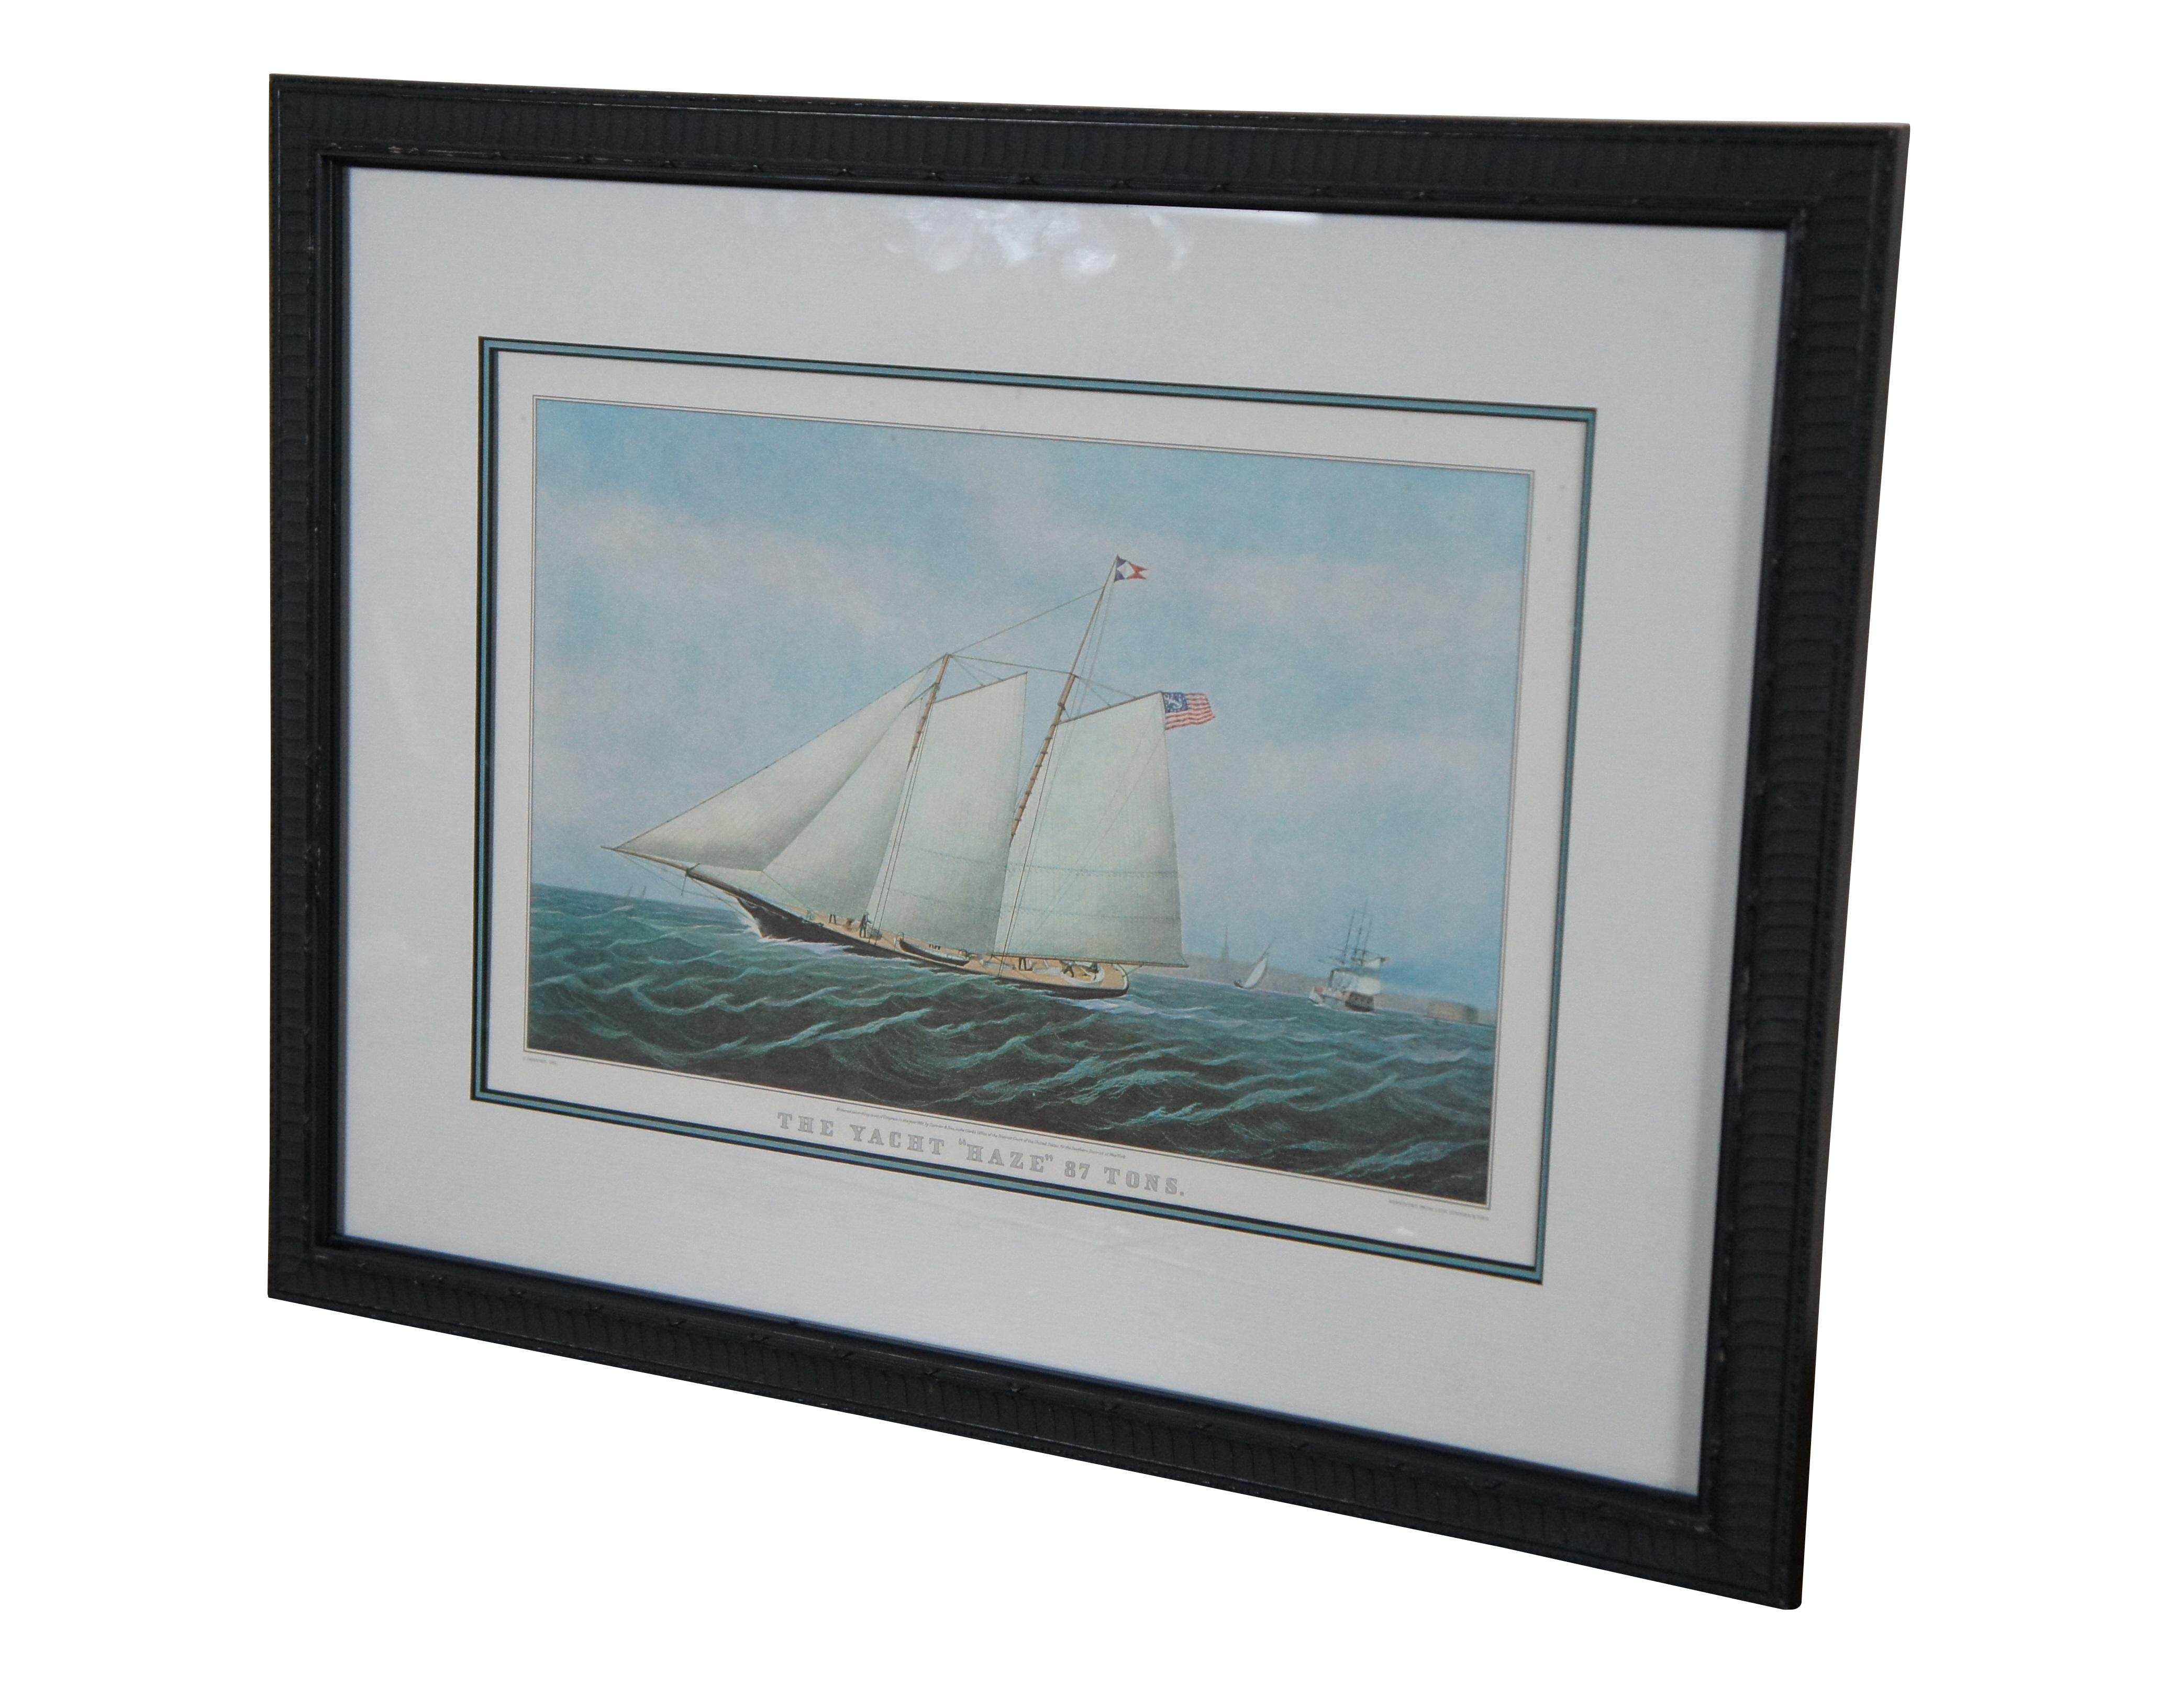 Vintage framed print of “The Yacht ‘Haze’ 87 Tons,” originally by C. Parsons, reprinted from the lithograph by Currier and Ives.  Built By George Steers New York, 1861.  Professionally framed and matted

Dimensions:
21.25